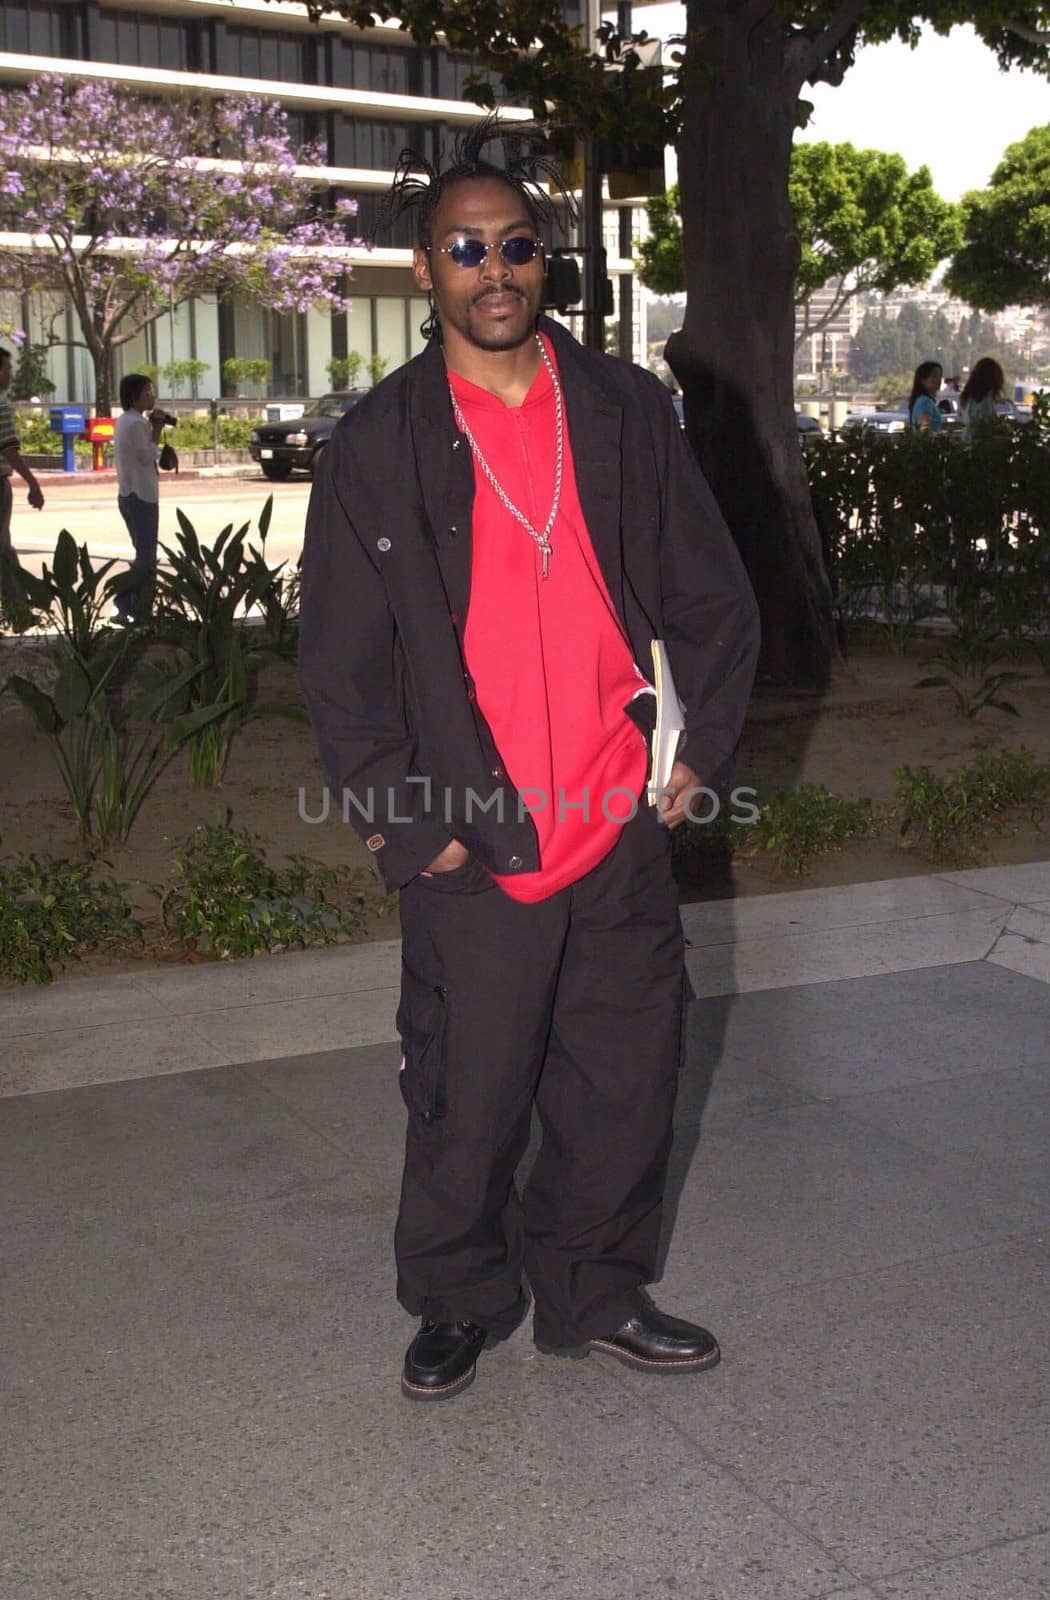 Coolio at the 14th Annual Fulfillment Fund L.A. Education Awards, Los Angeles, 06-10-00